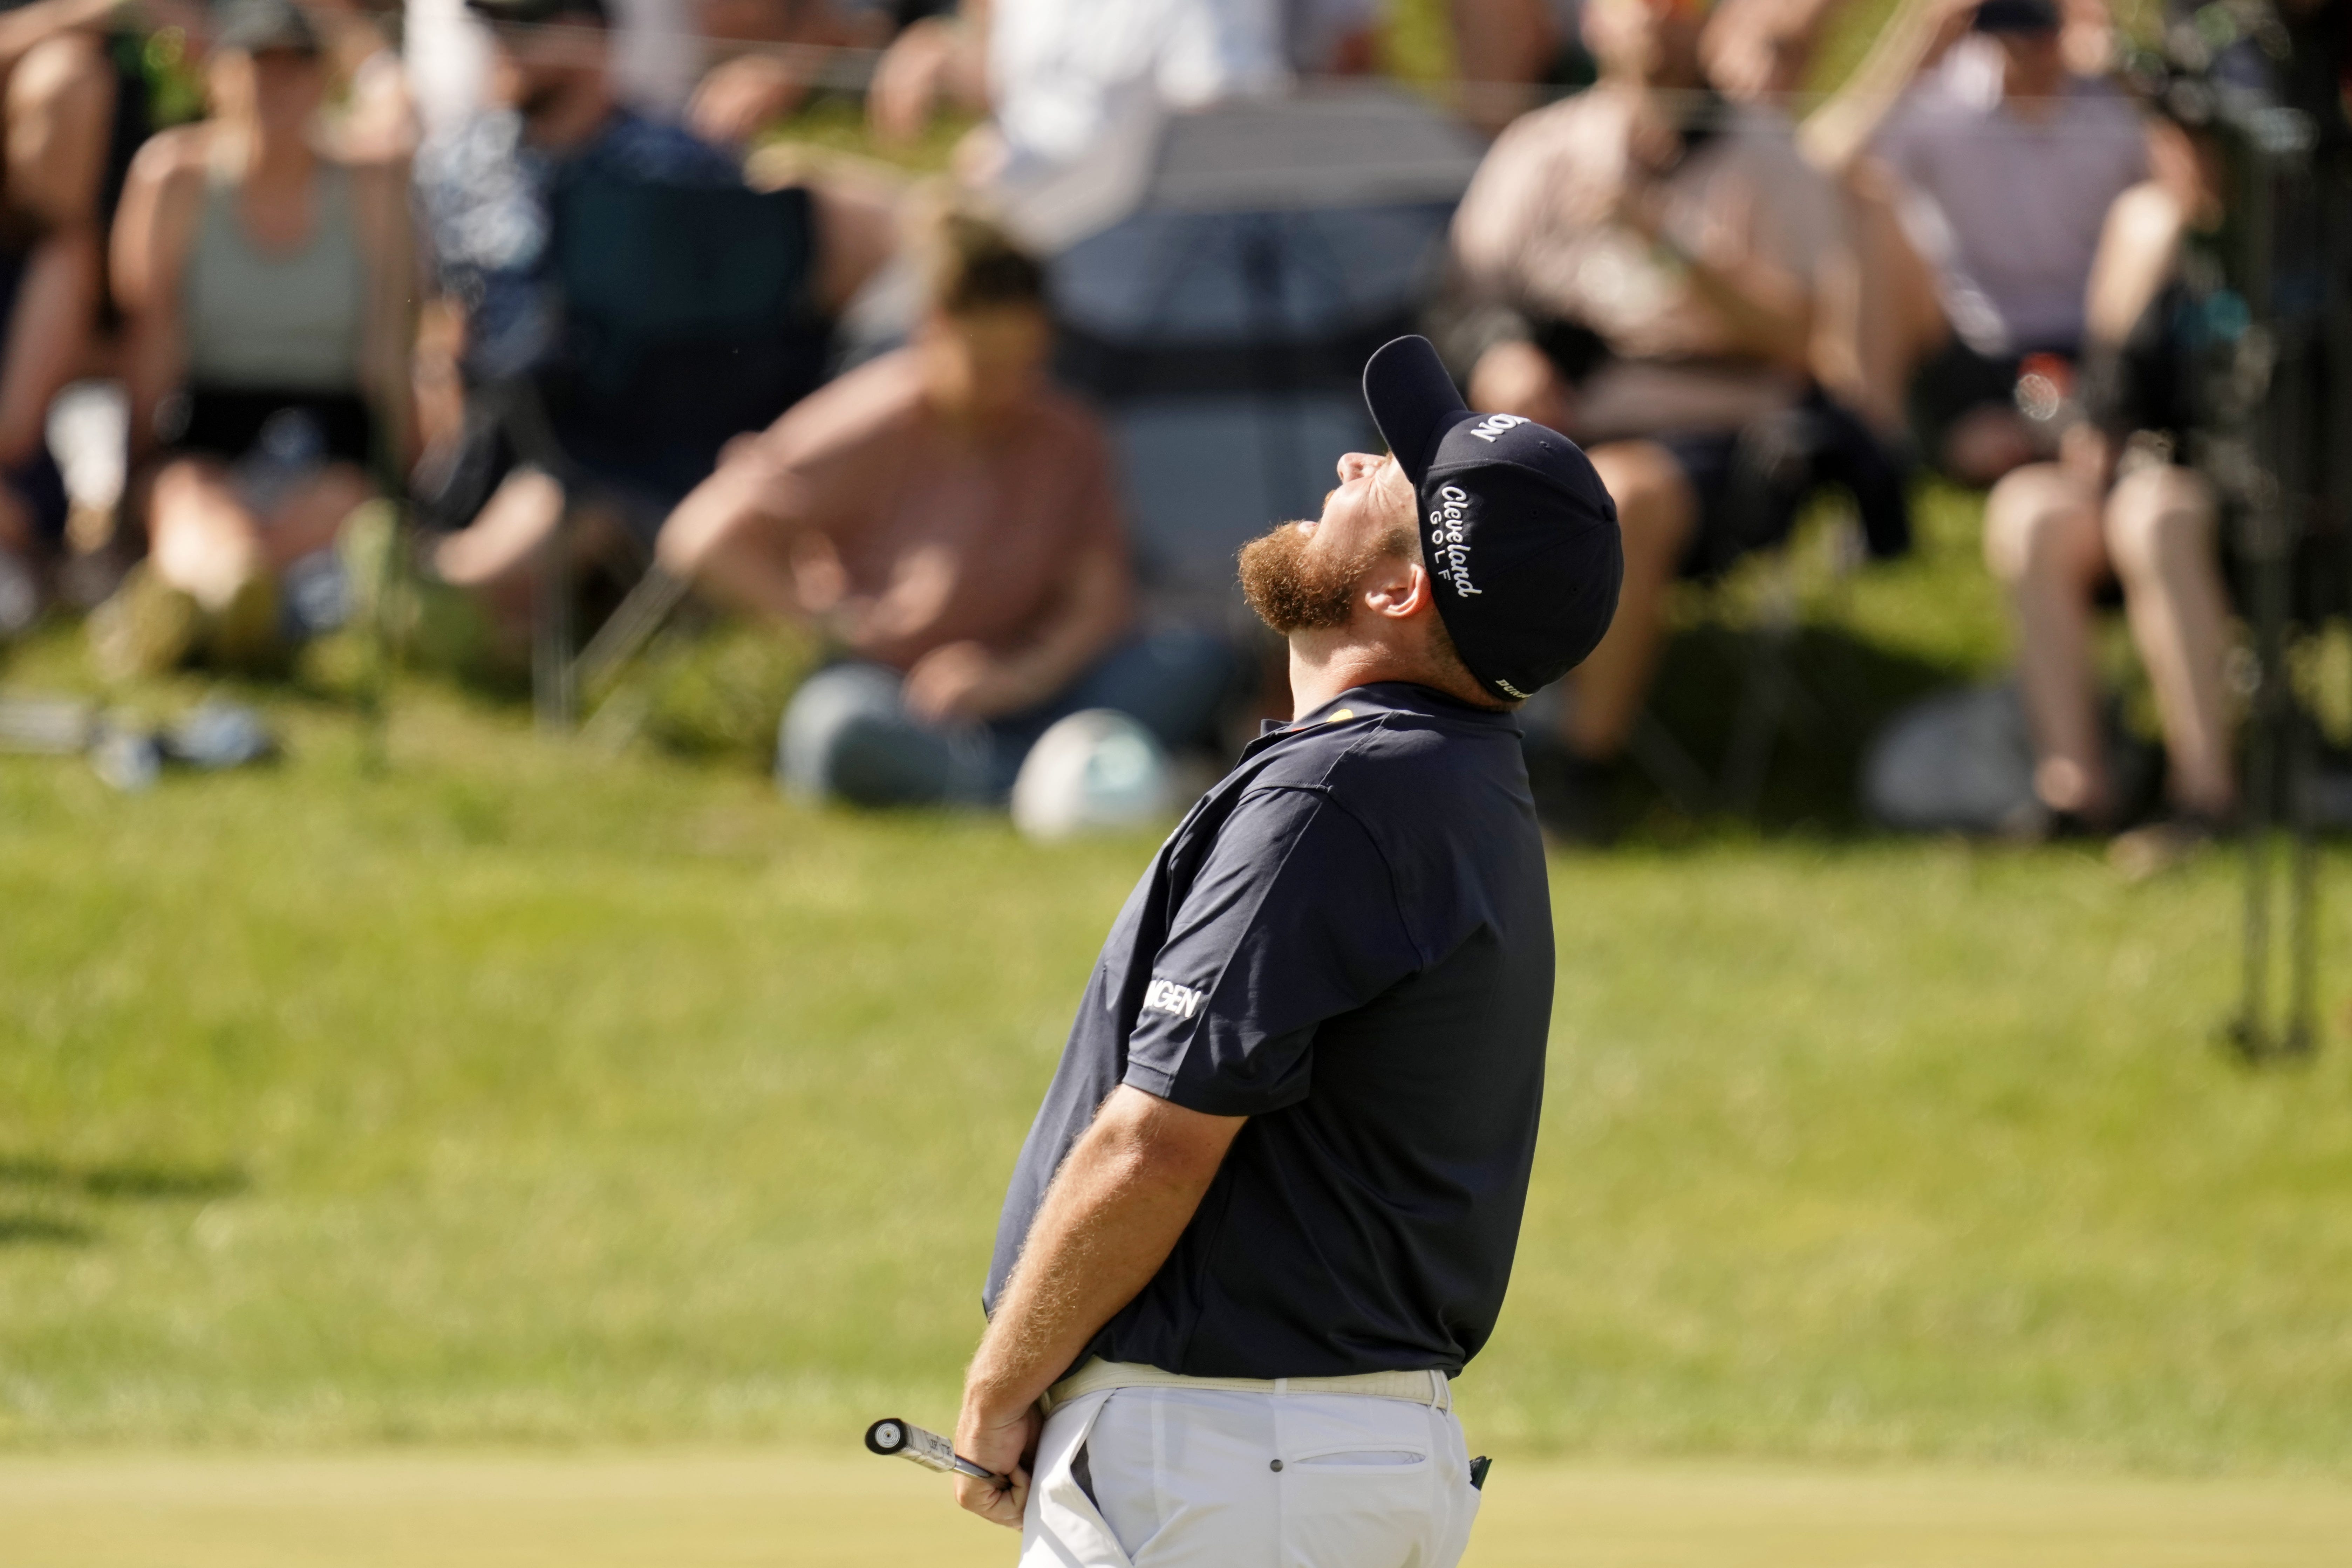 PGA Championship: Shane Lowry is in contention for his second major after another historic round at Valhalla